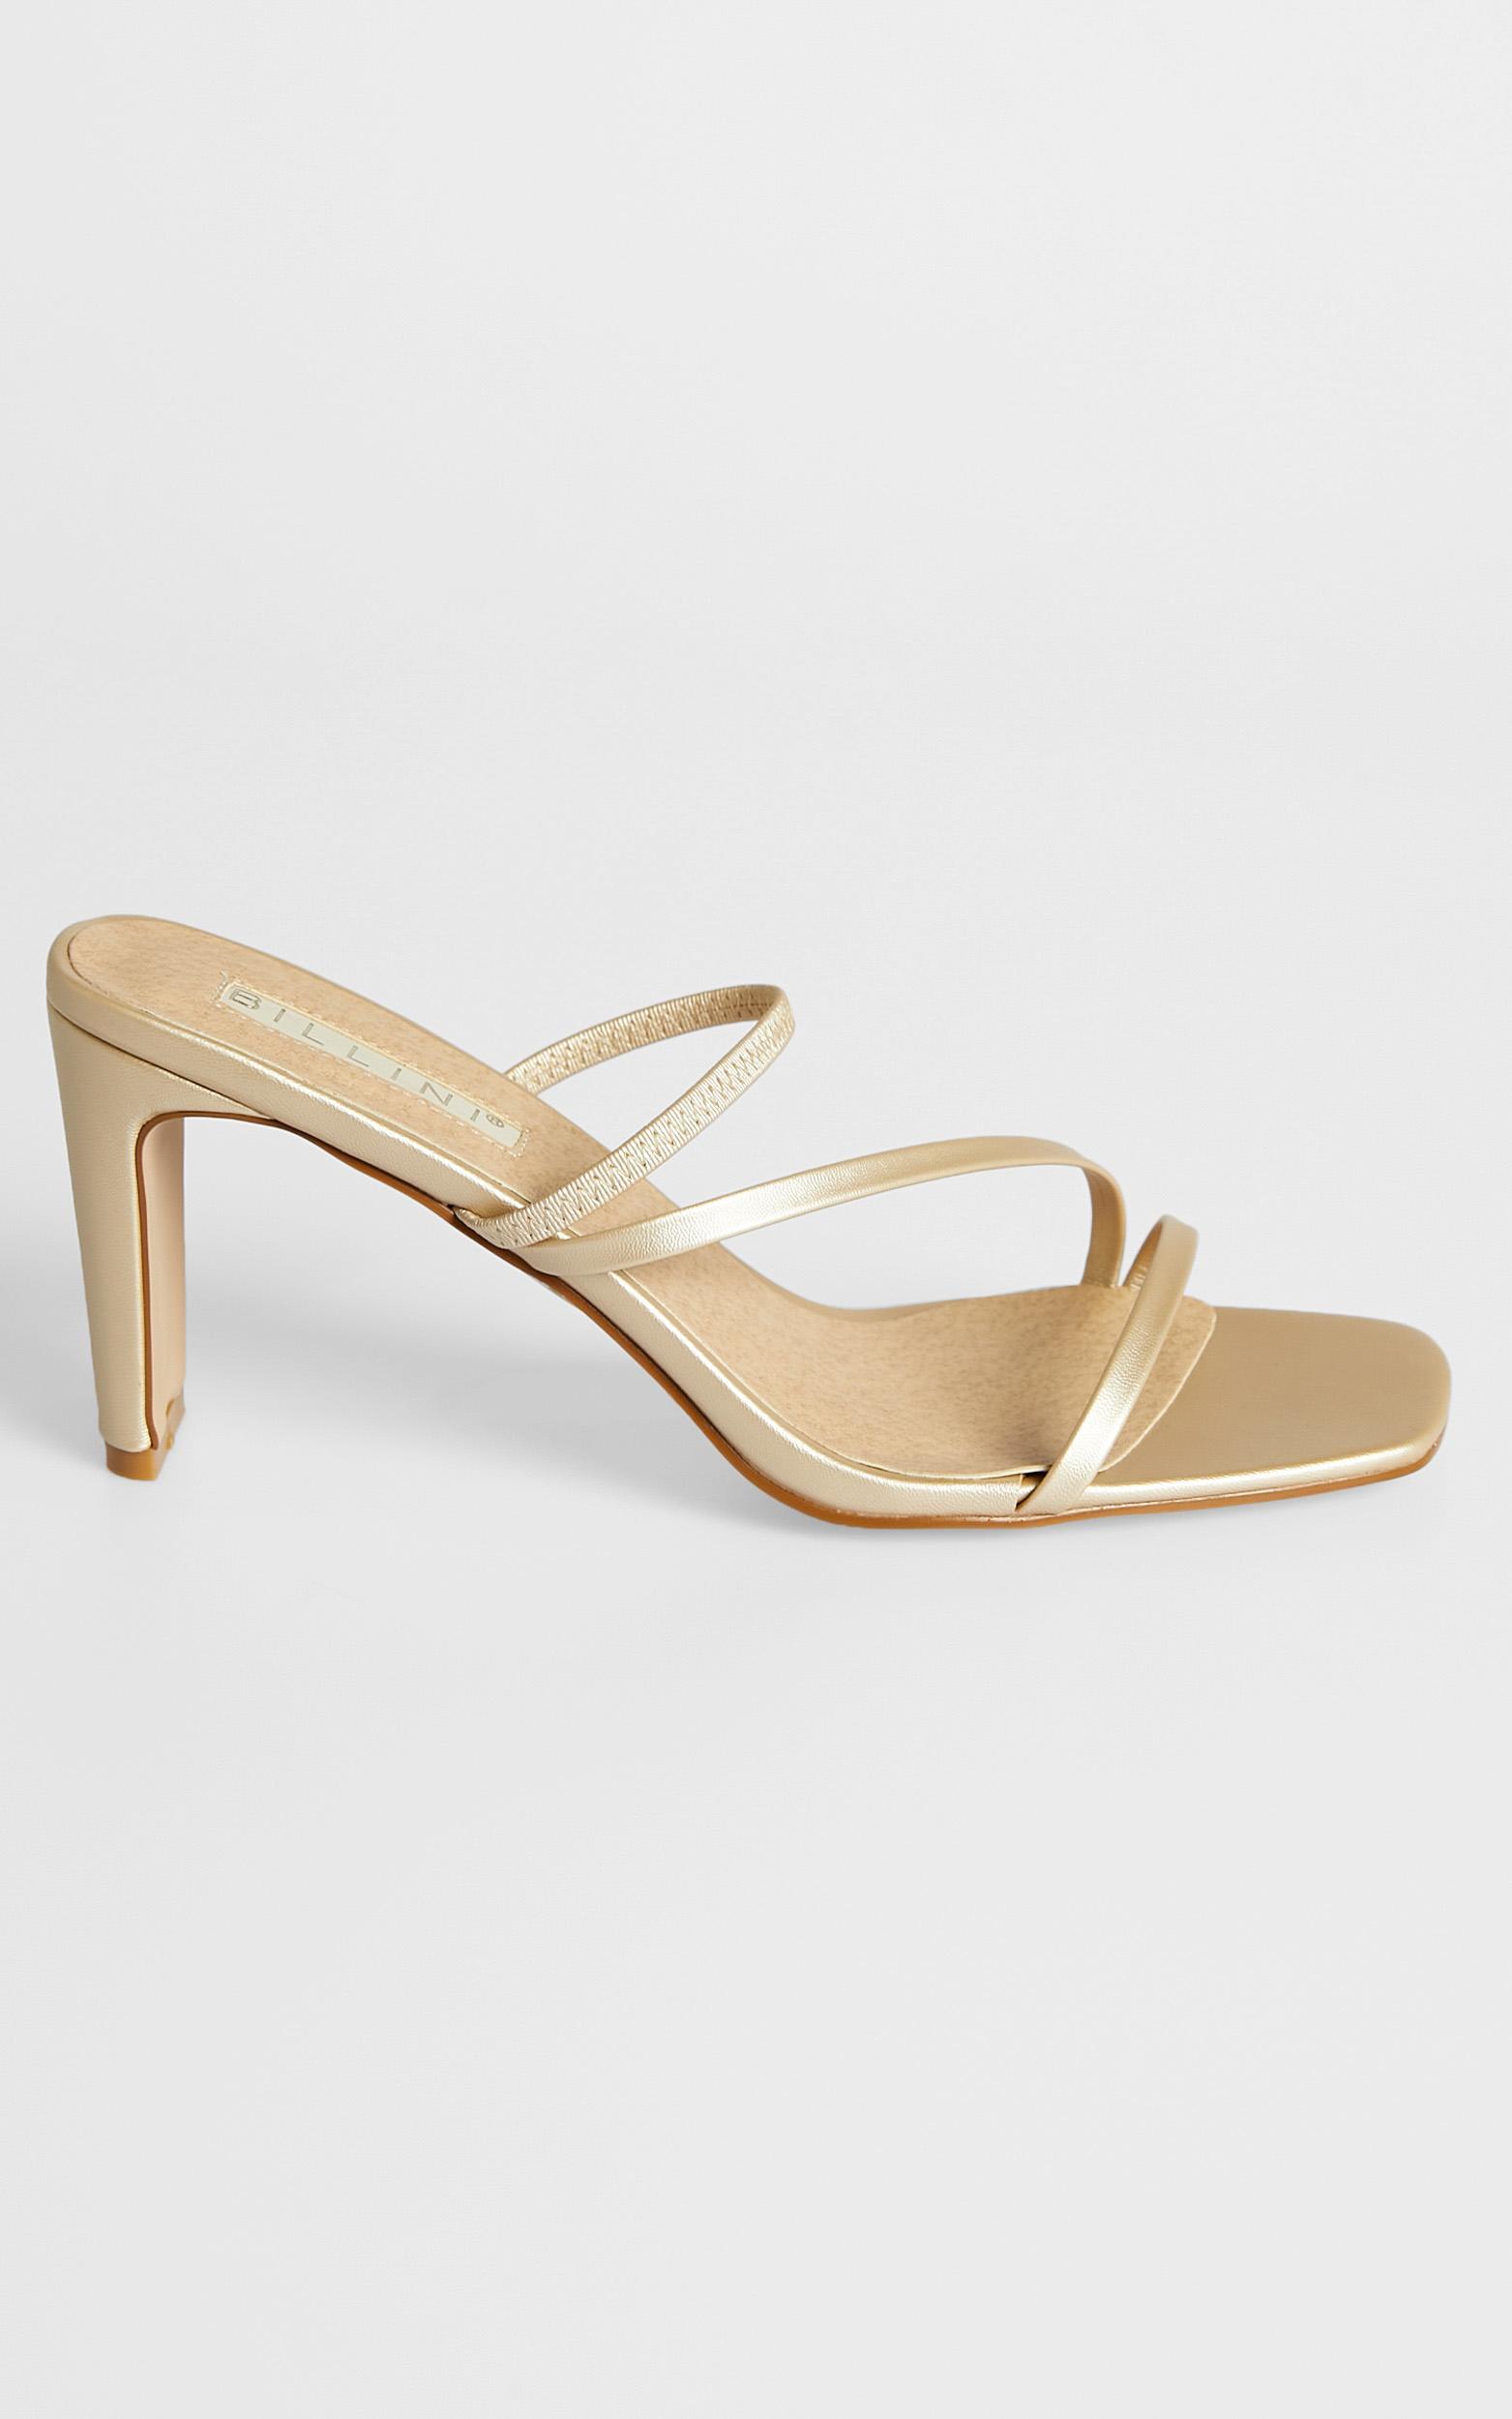 Billini - Solace Heels in Champagne - 05, NEU2, hi-res image number null